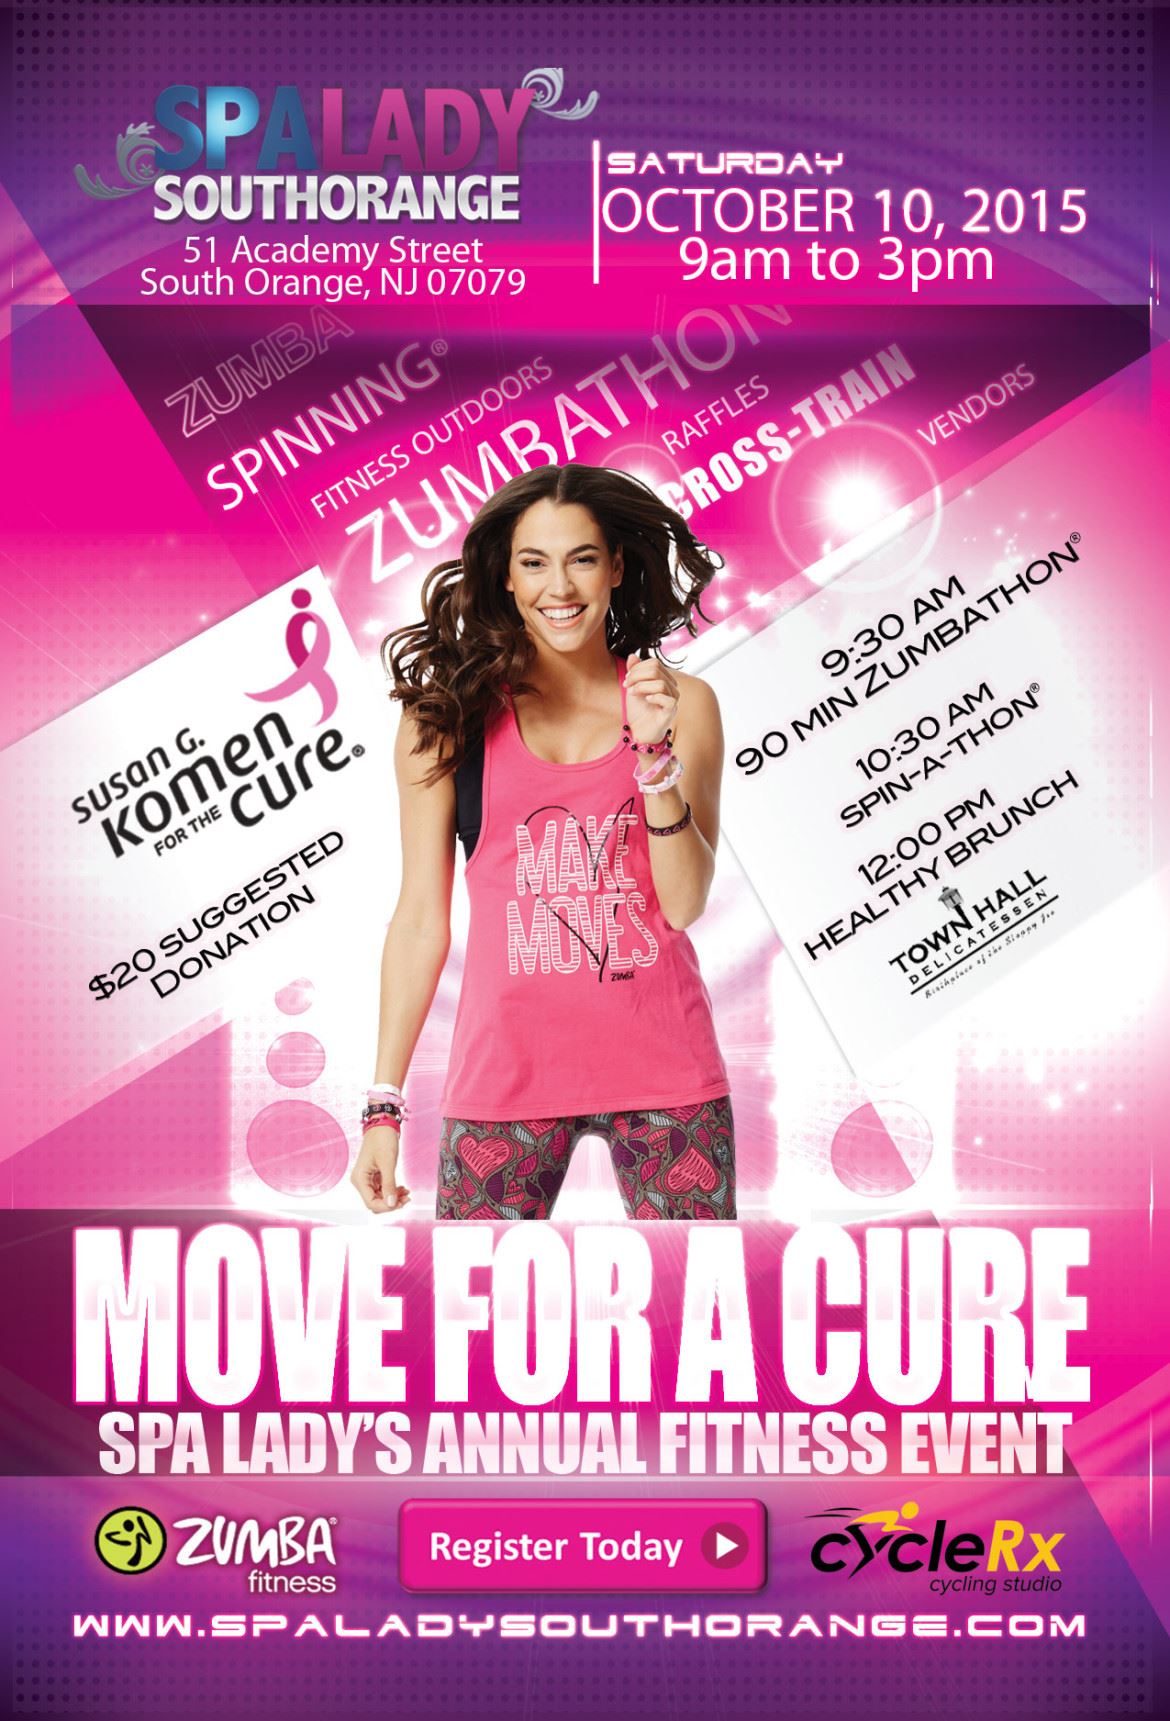 move-for-a-cure-2015-flyer-spa lady south orange